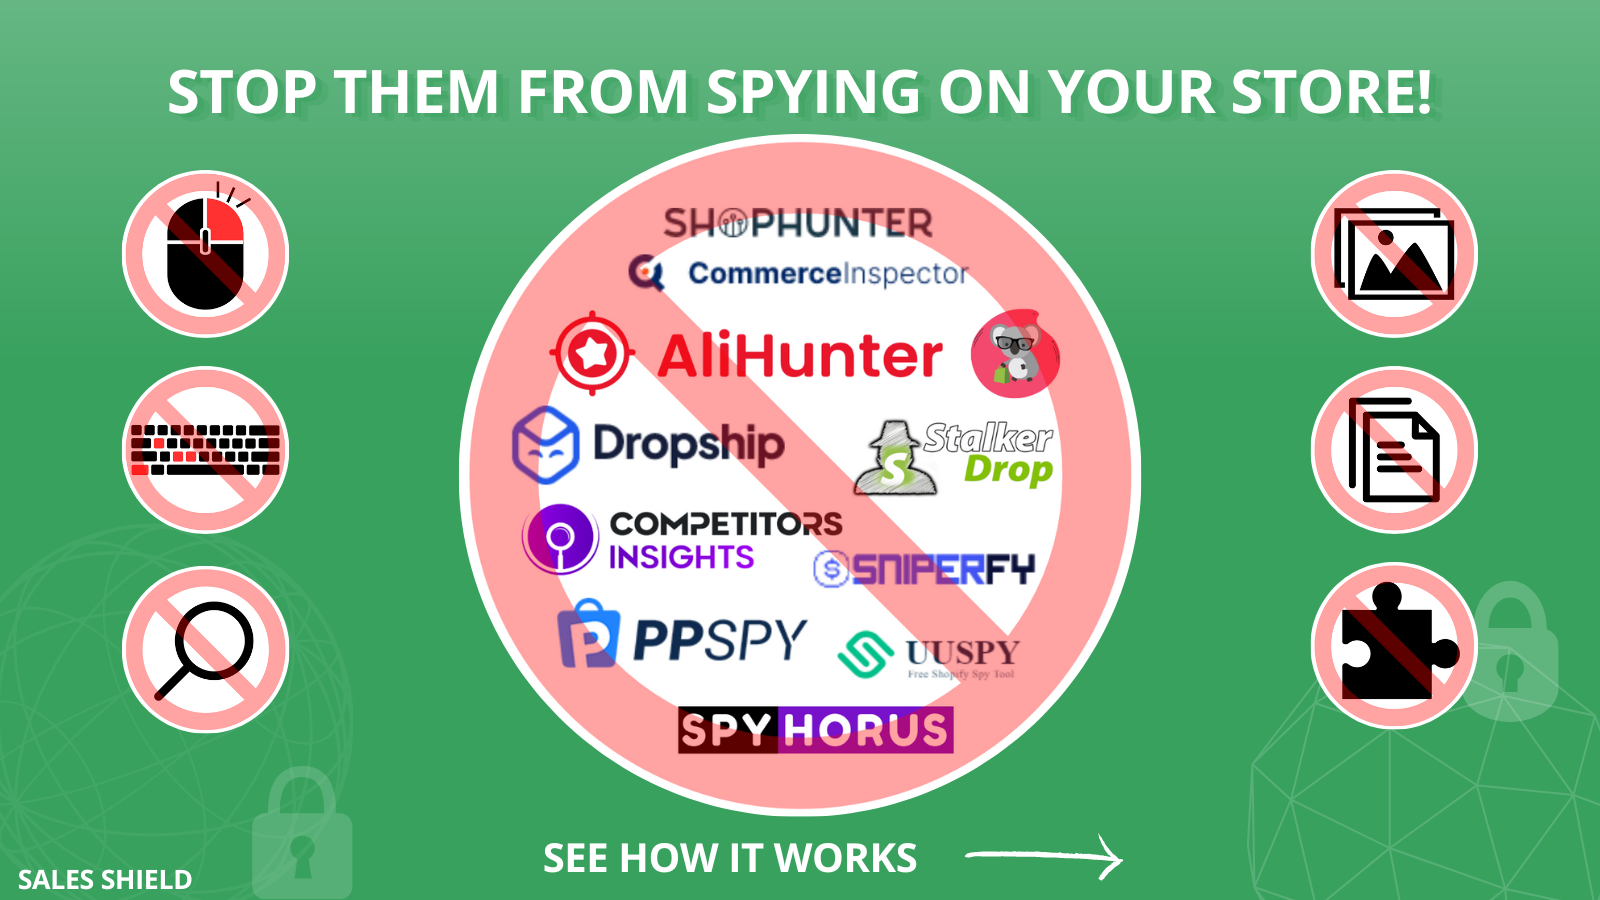 Stop them from spying on your store! Shophunter, ppspy, uuspy